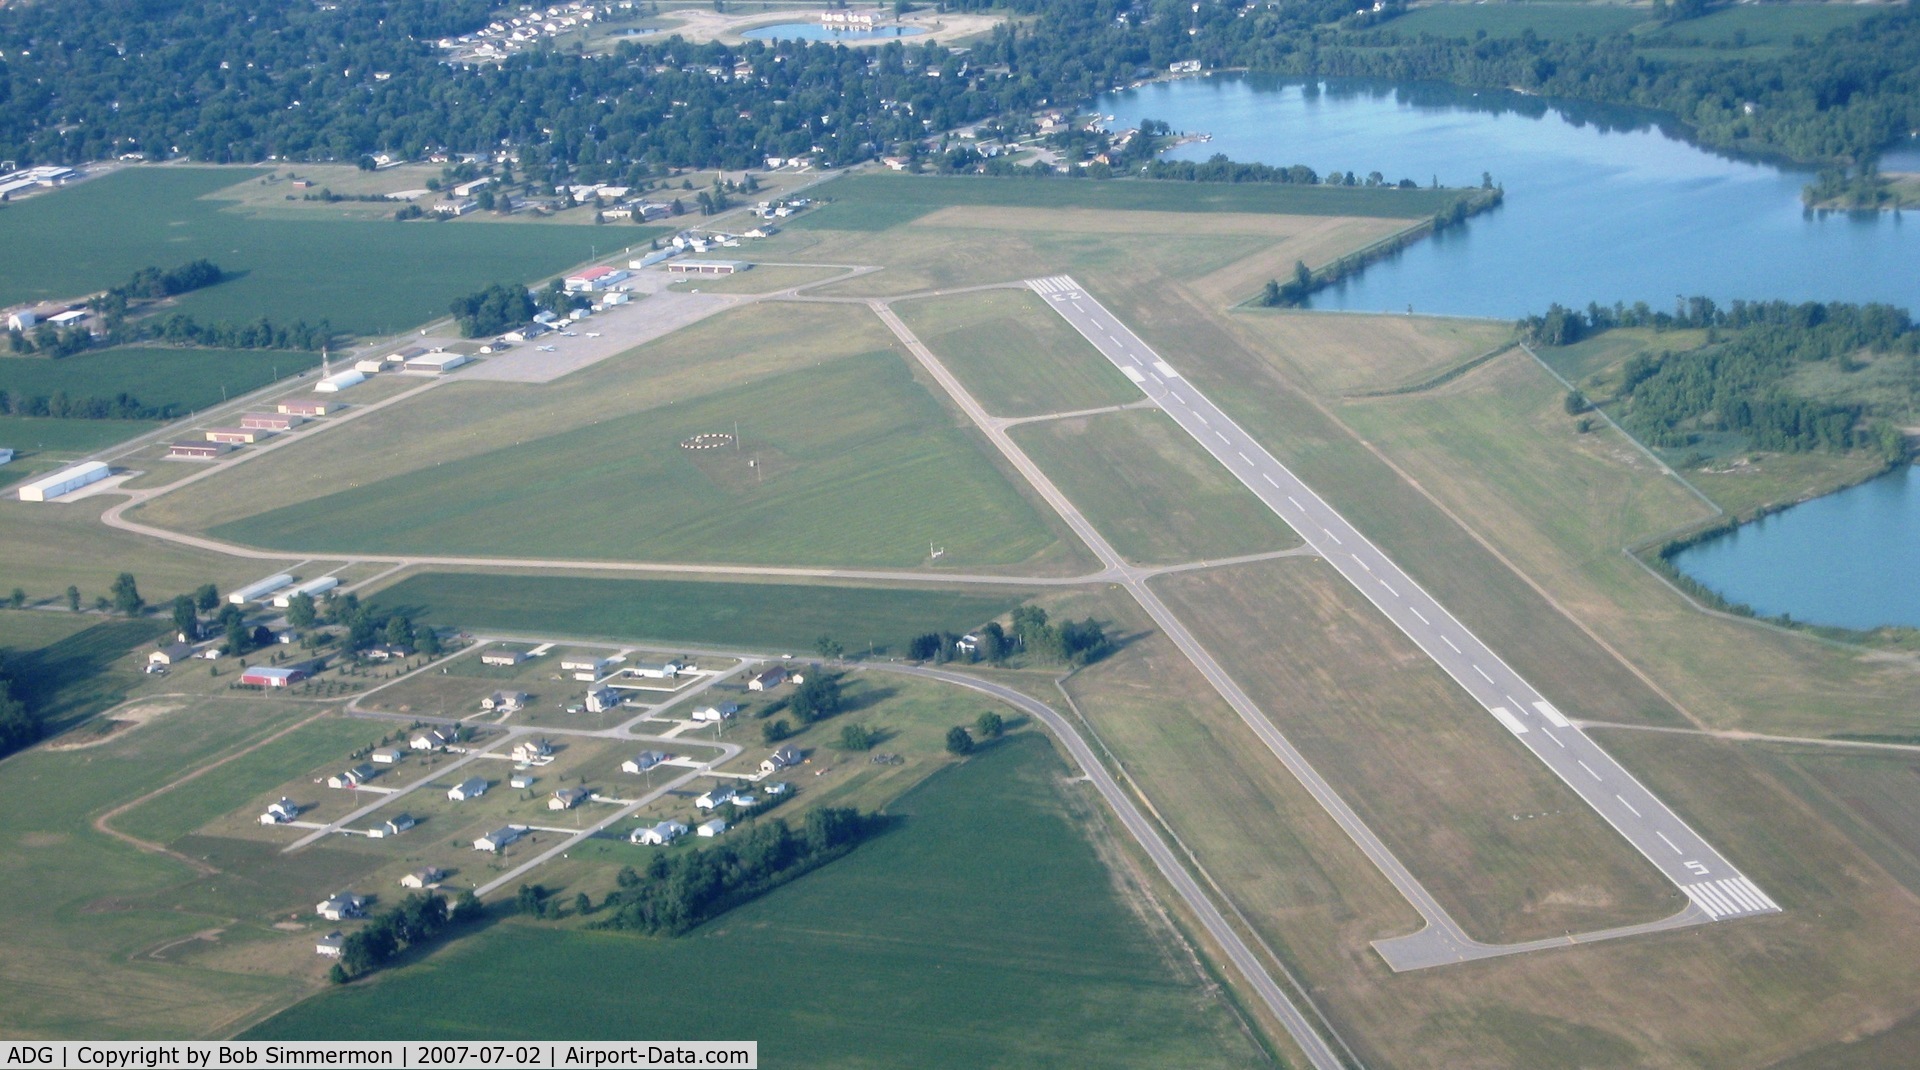 Lenawee County Airport (ADG) - Looking up runway 5 from 3500' near Adrian, MI.